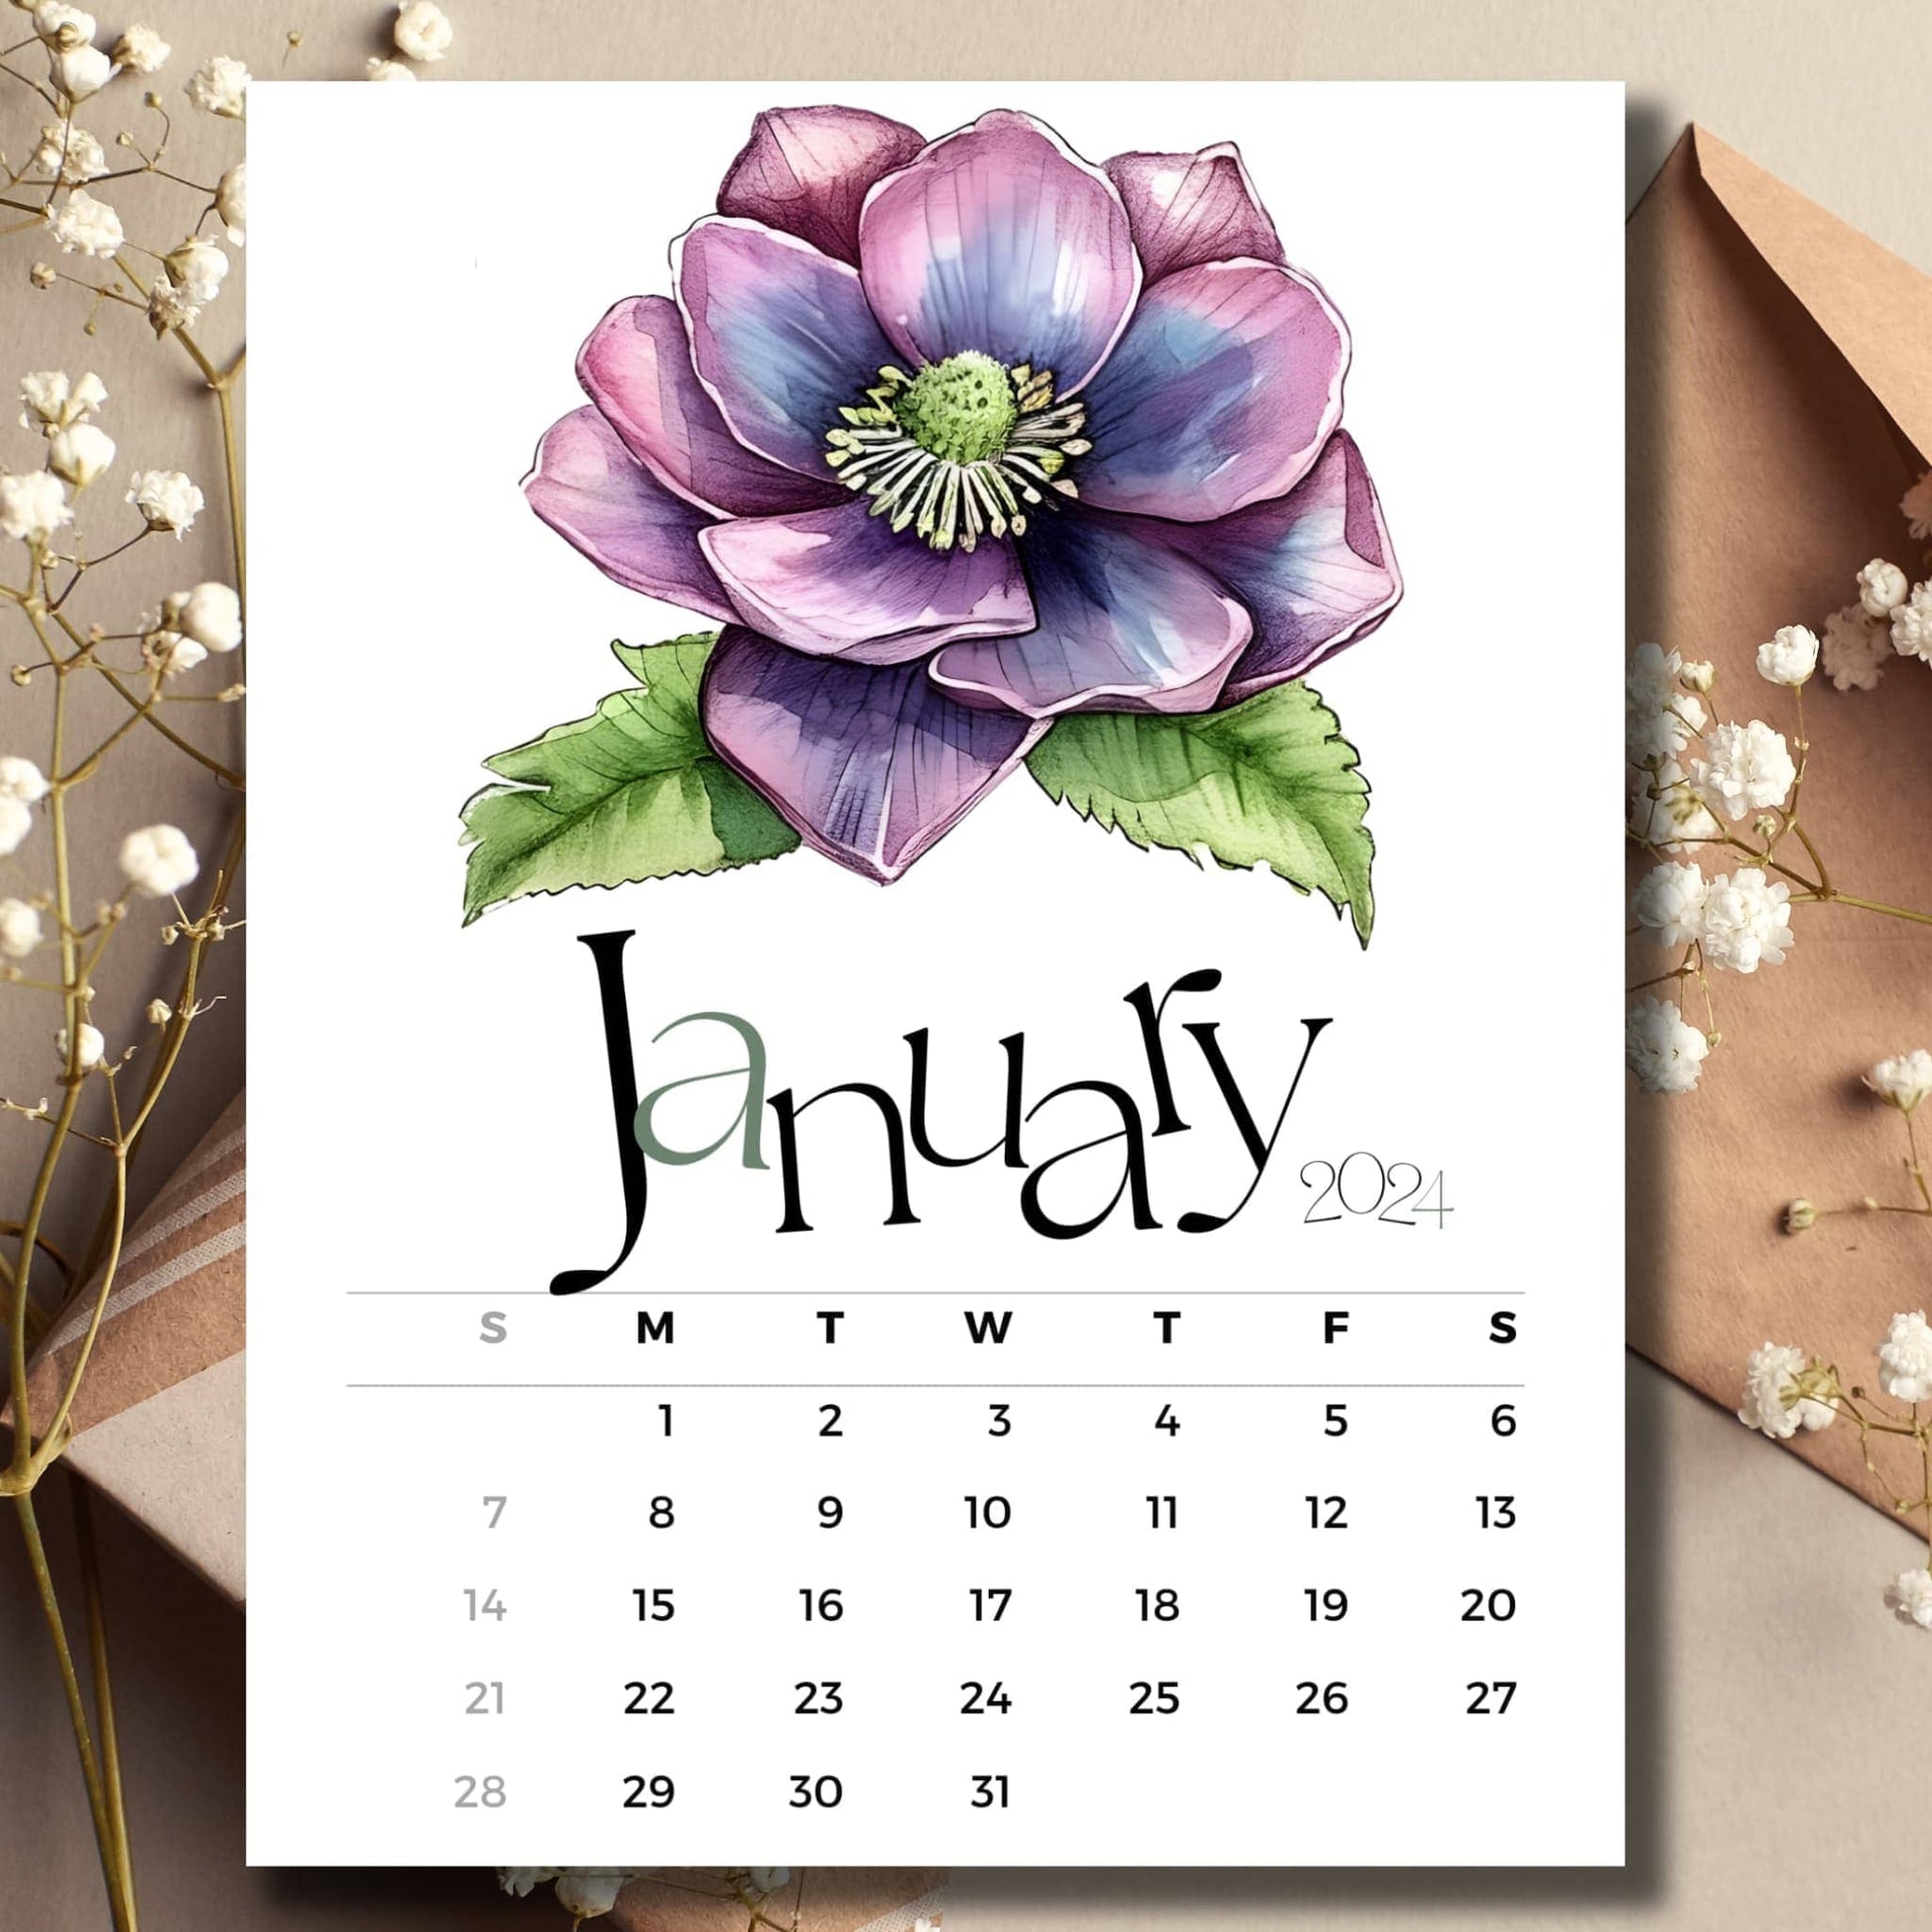 January 2024 Hellebores floral full year calendar on a table with envelope and small white flowers.